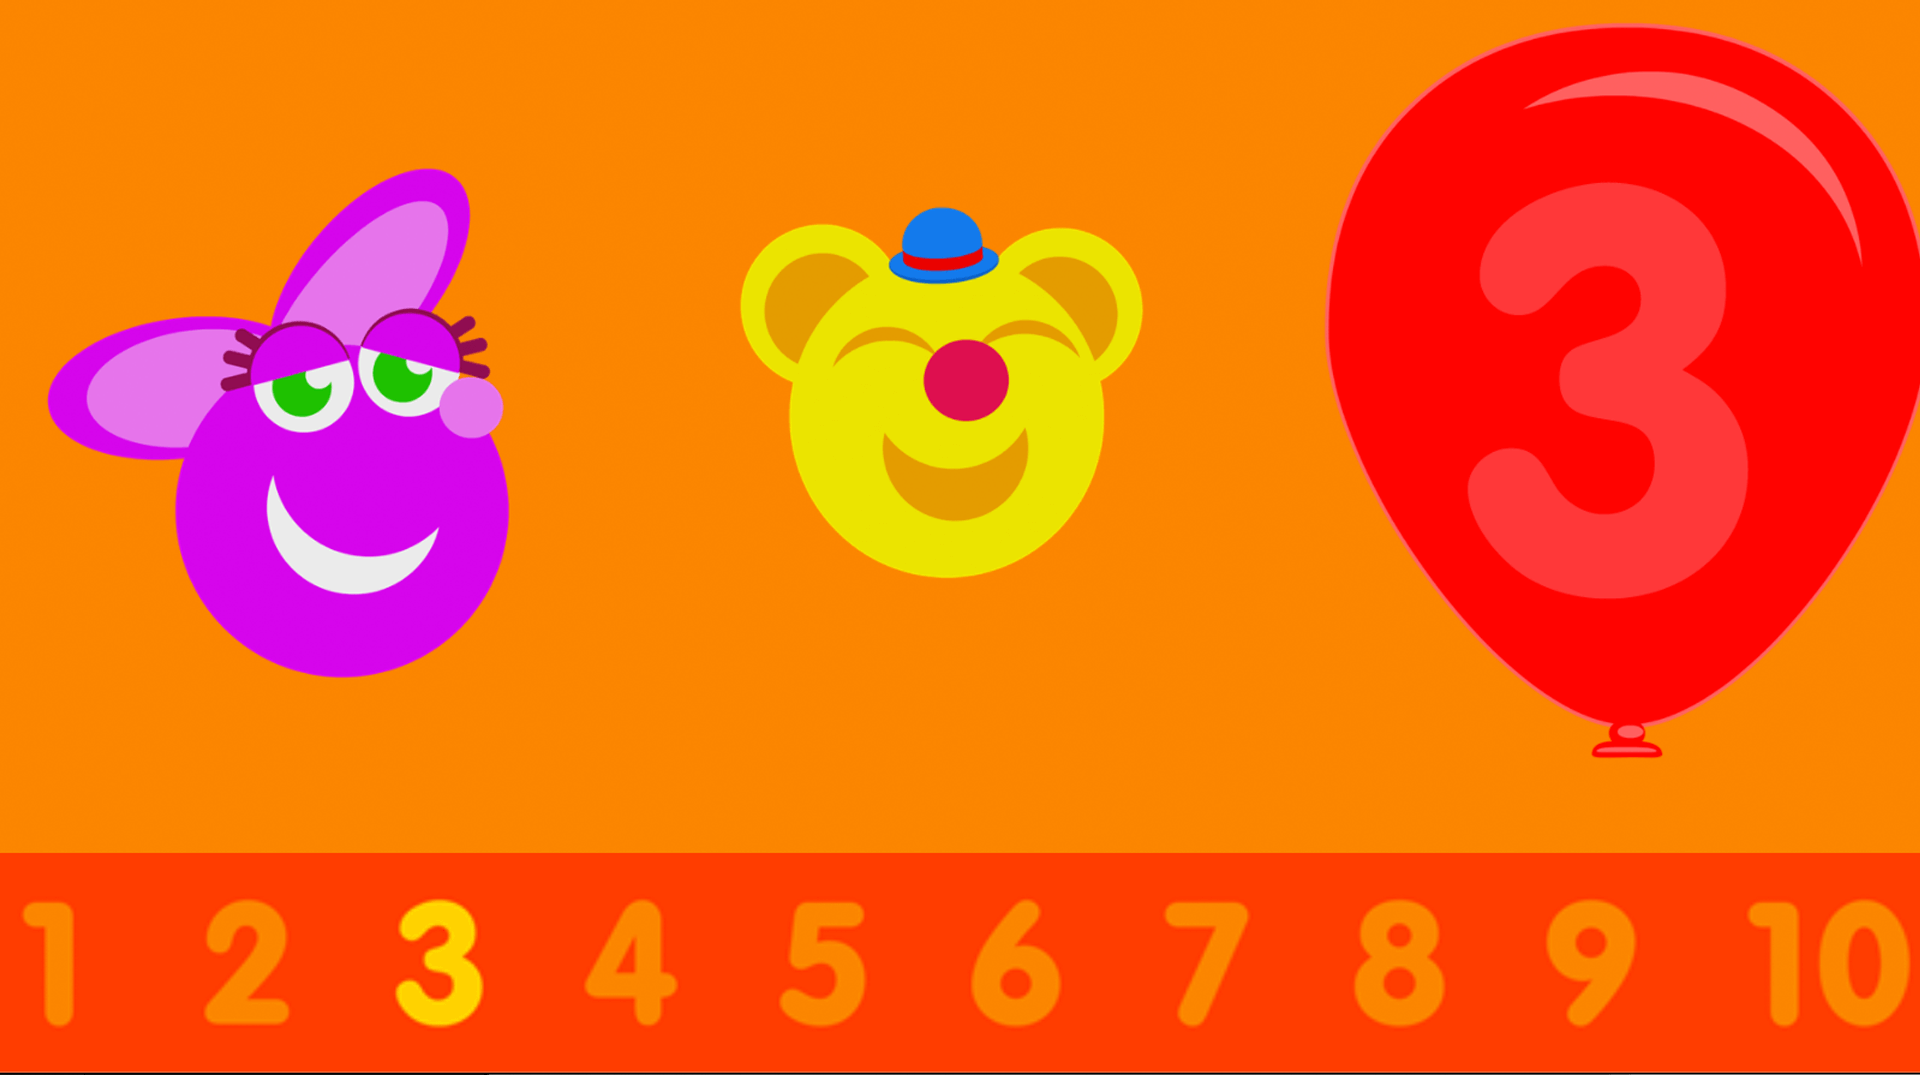 learn numbers, learn counting, game for baby, game for toddlers